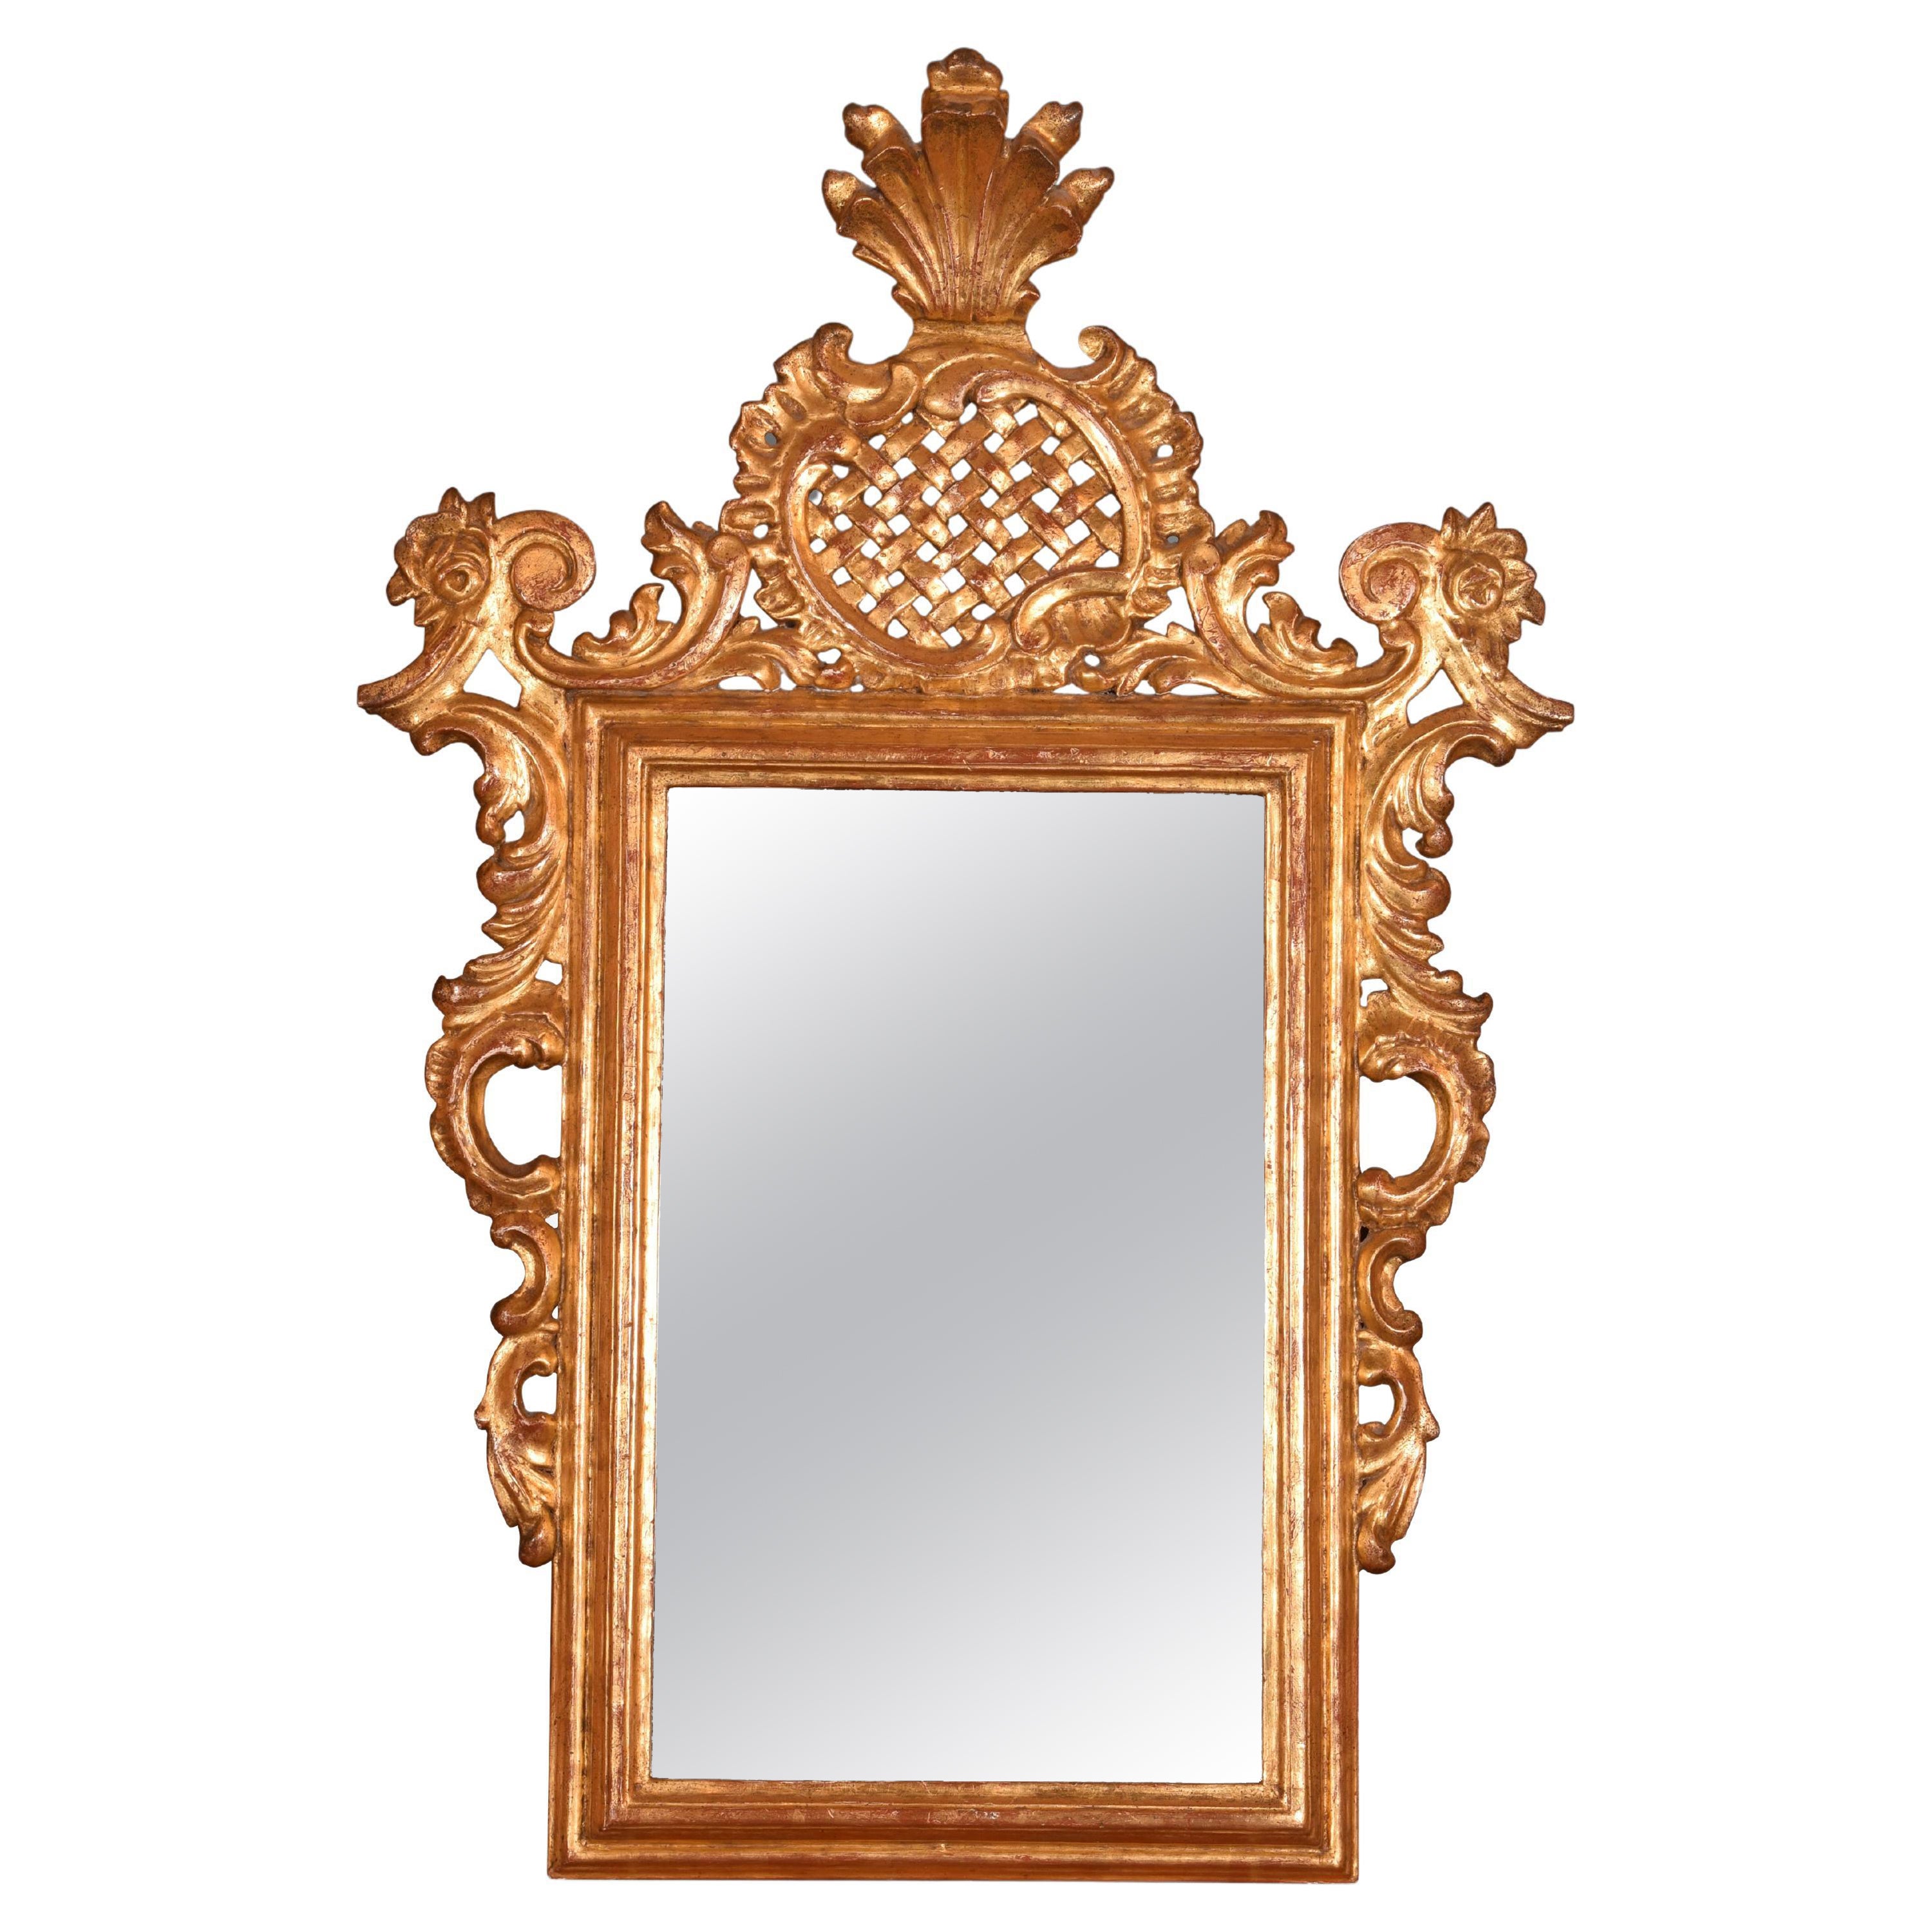 Mirror with Rococo Style Frame, Wood, 20th Century